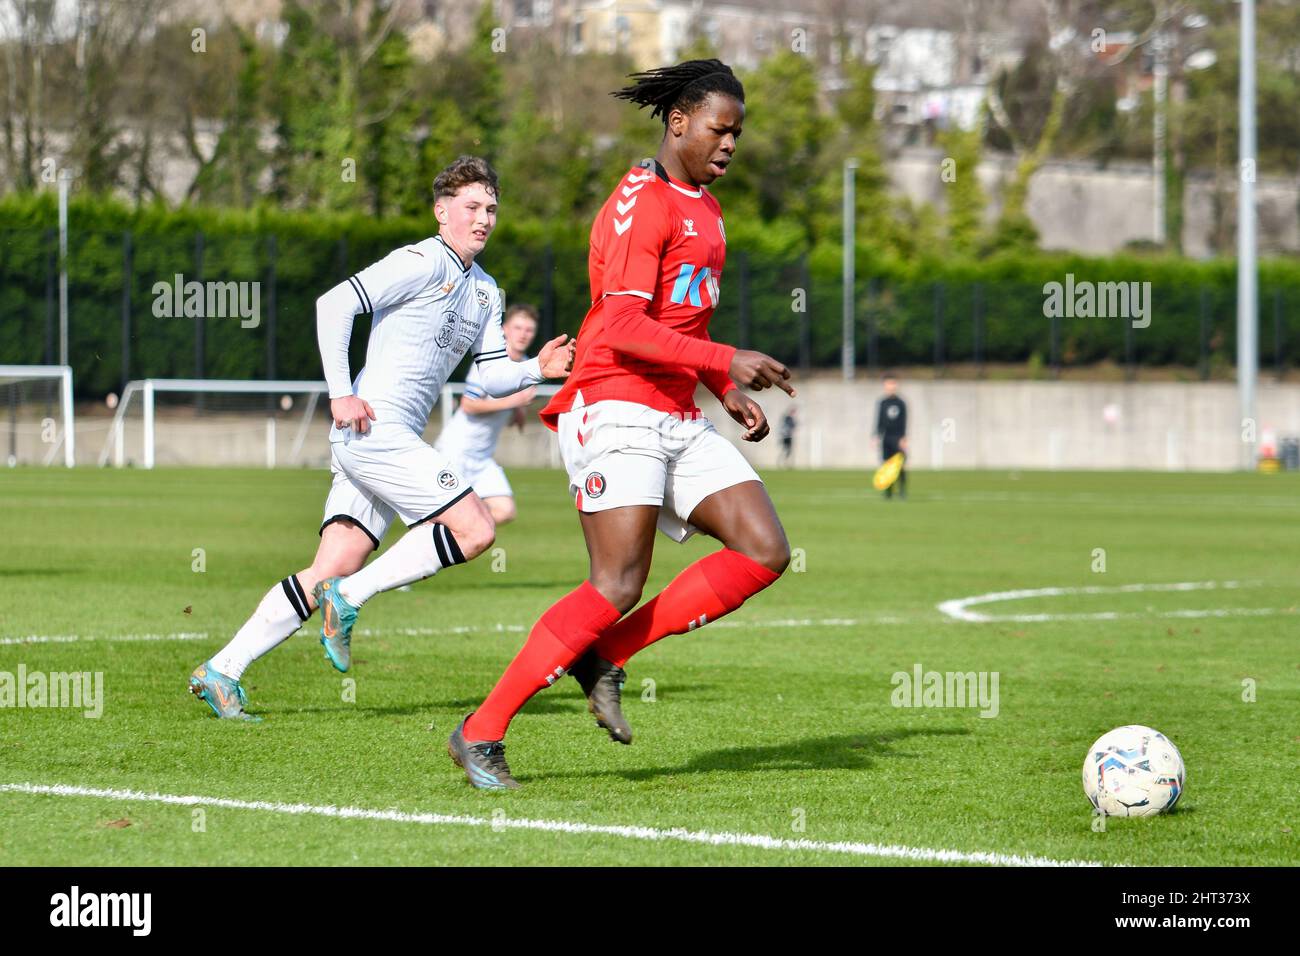 Swansea, Wales. 26 February, 2022. Karoy Anderson of Charlton Athletic Under 18s during the Professional Development League game between Swansea City Under 18s and Charlton Athletic Under 18s at the Swansea City Academy in Swansea, Wales, UK on 26, February 2022. Credit: Duncan Thomas/Majestic Media. Stock Photo